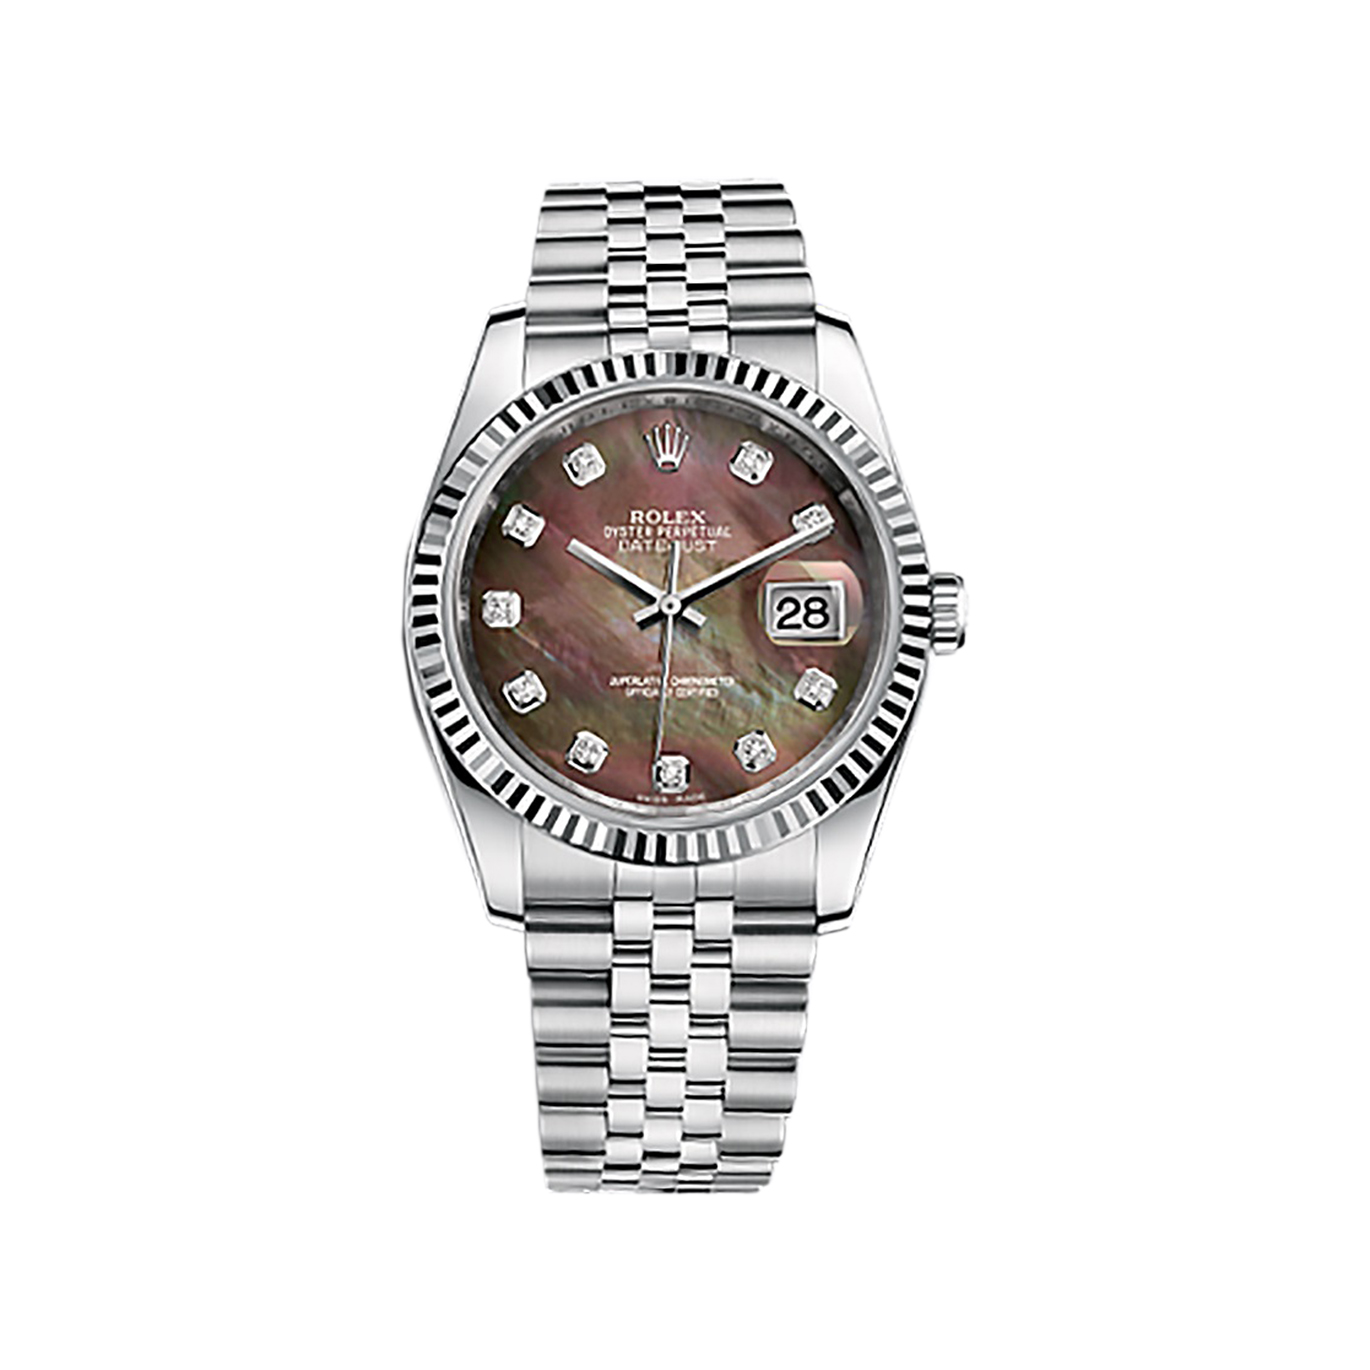 Datejust 36 116234 White Gold & Stainless Steel Watch (Black Mother-of-Pearl Set with Diamonds)